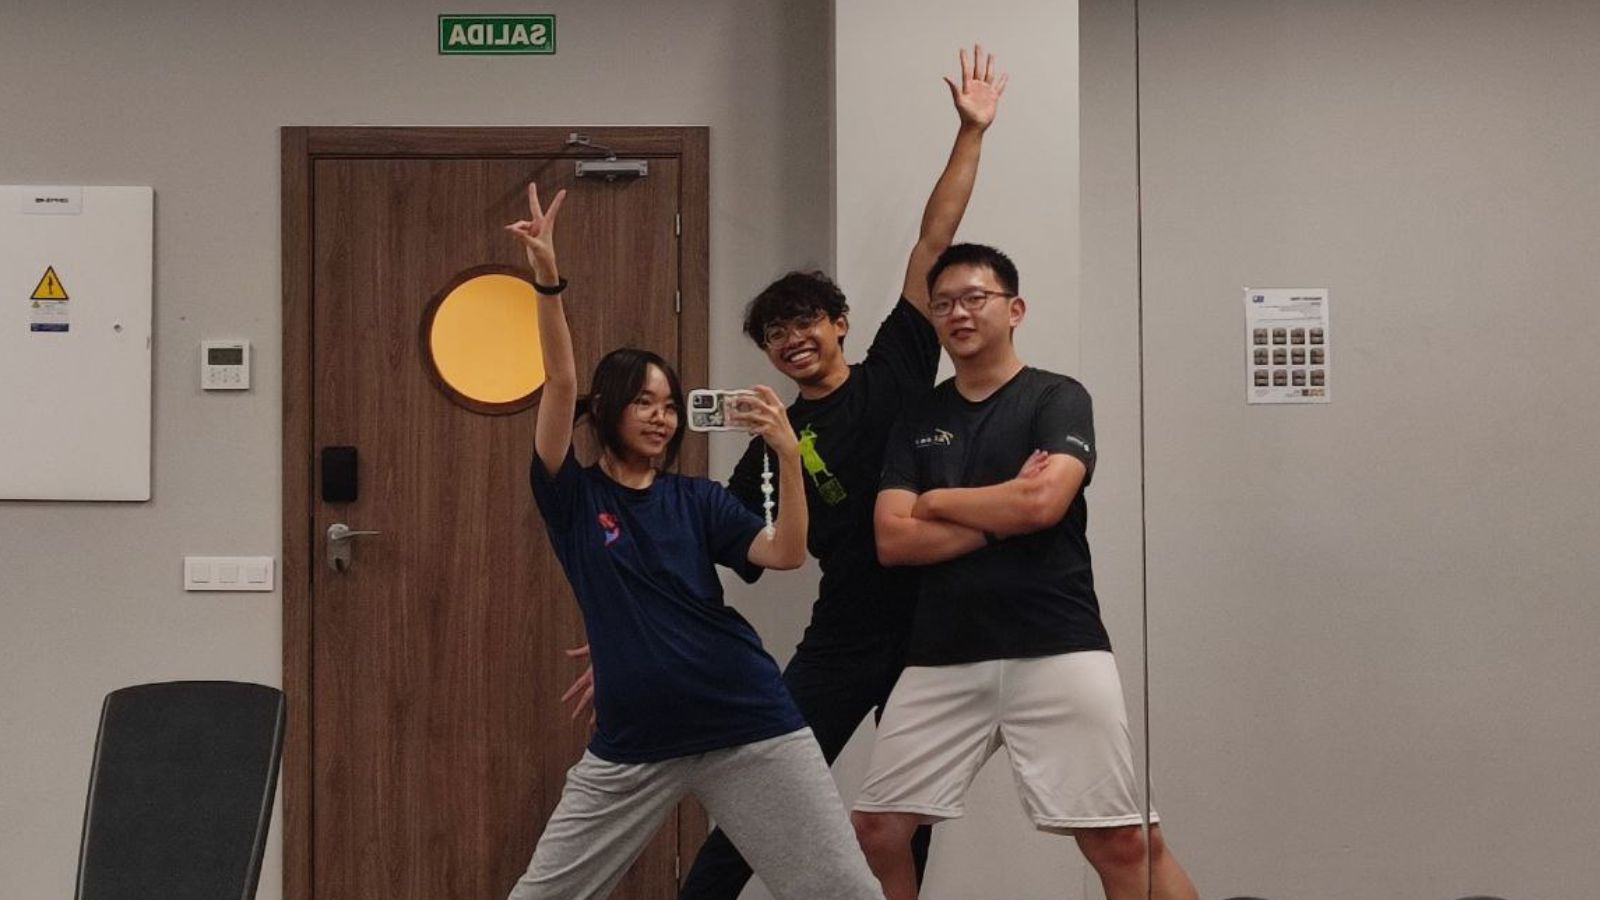 Three students pose together in a gym